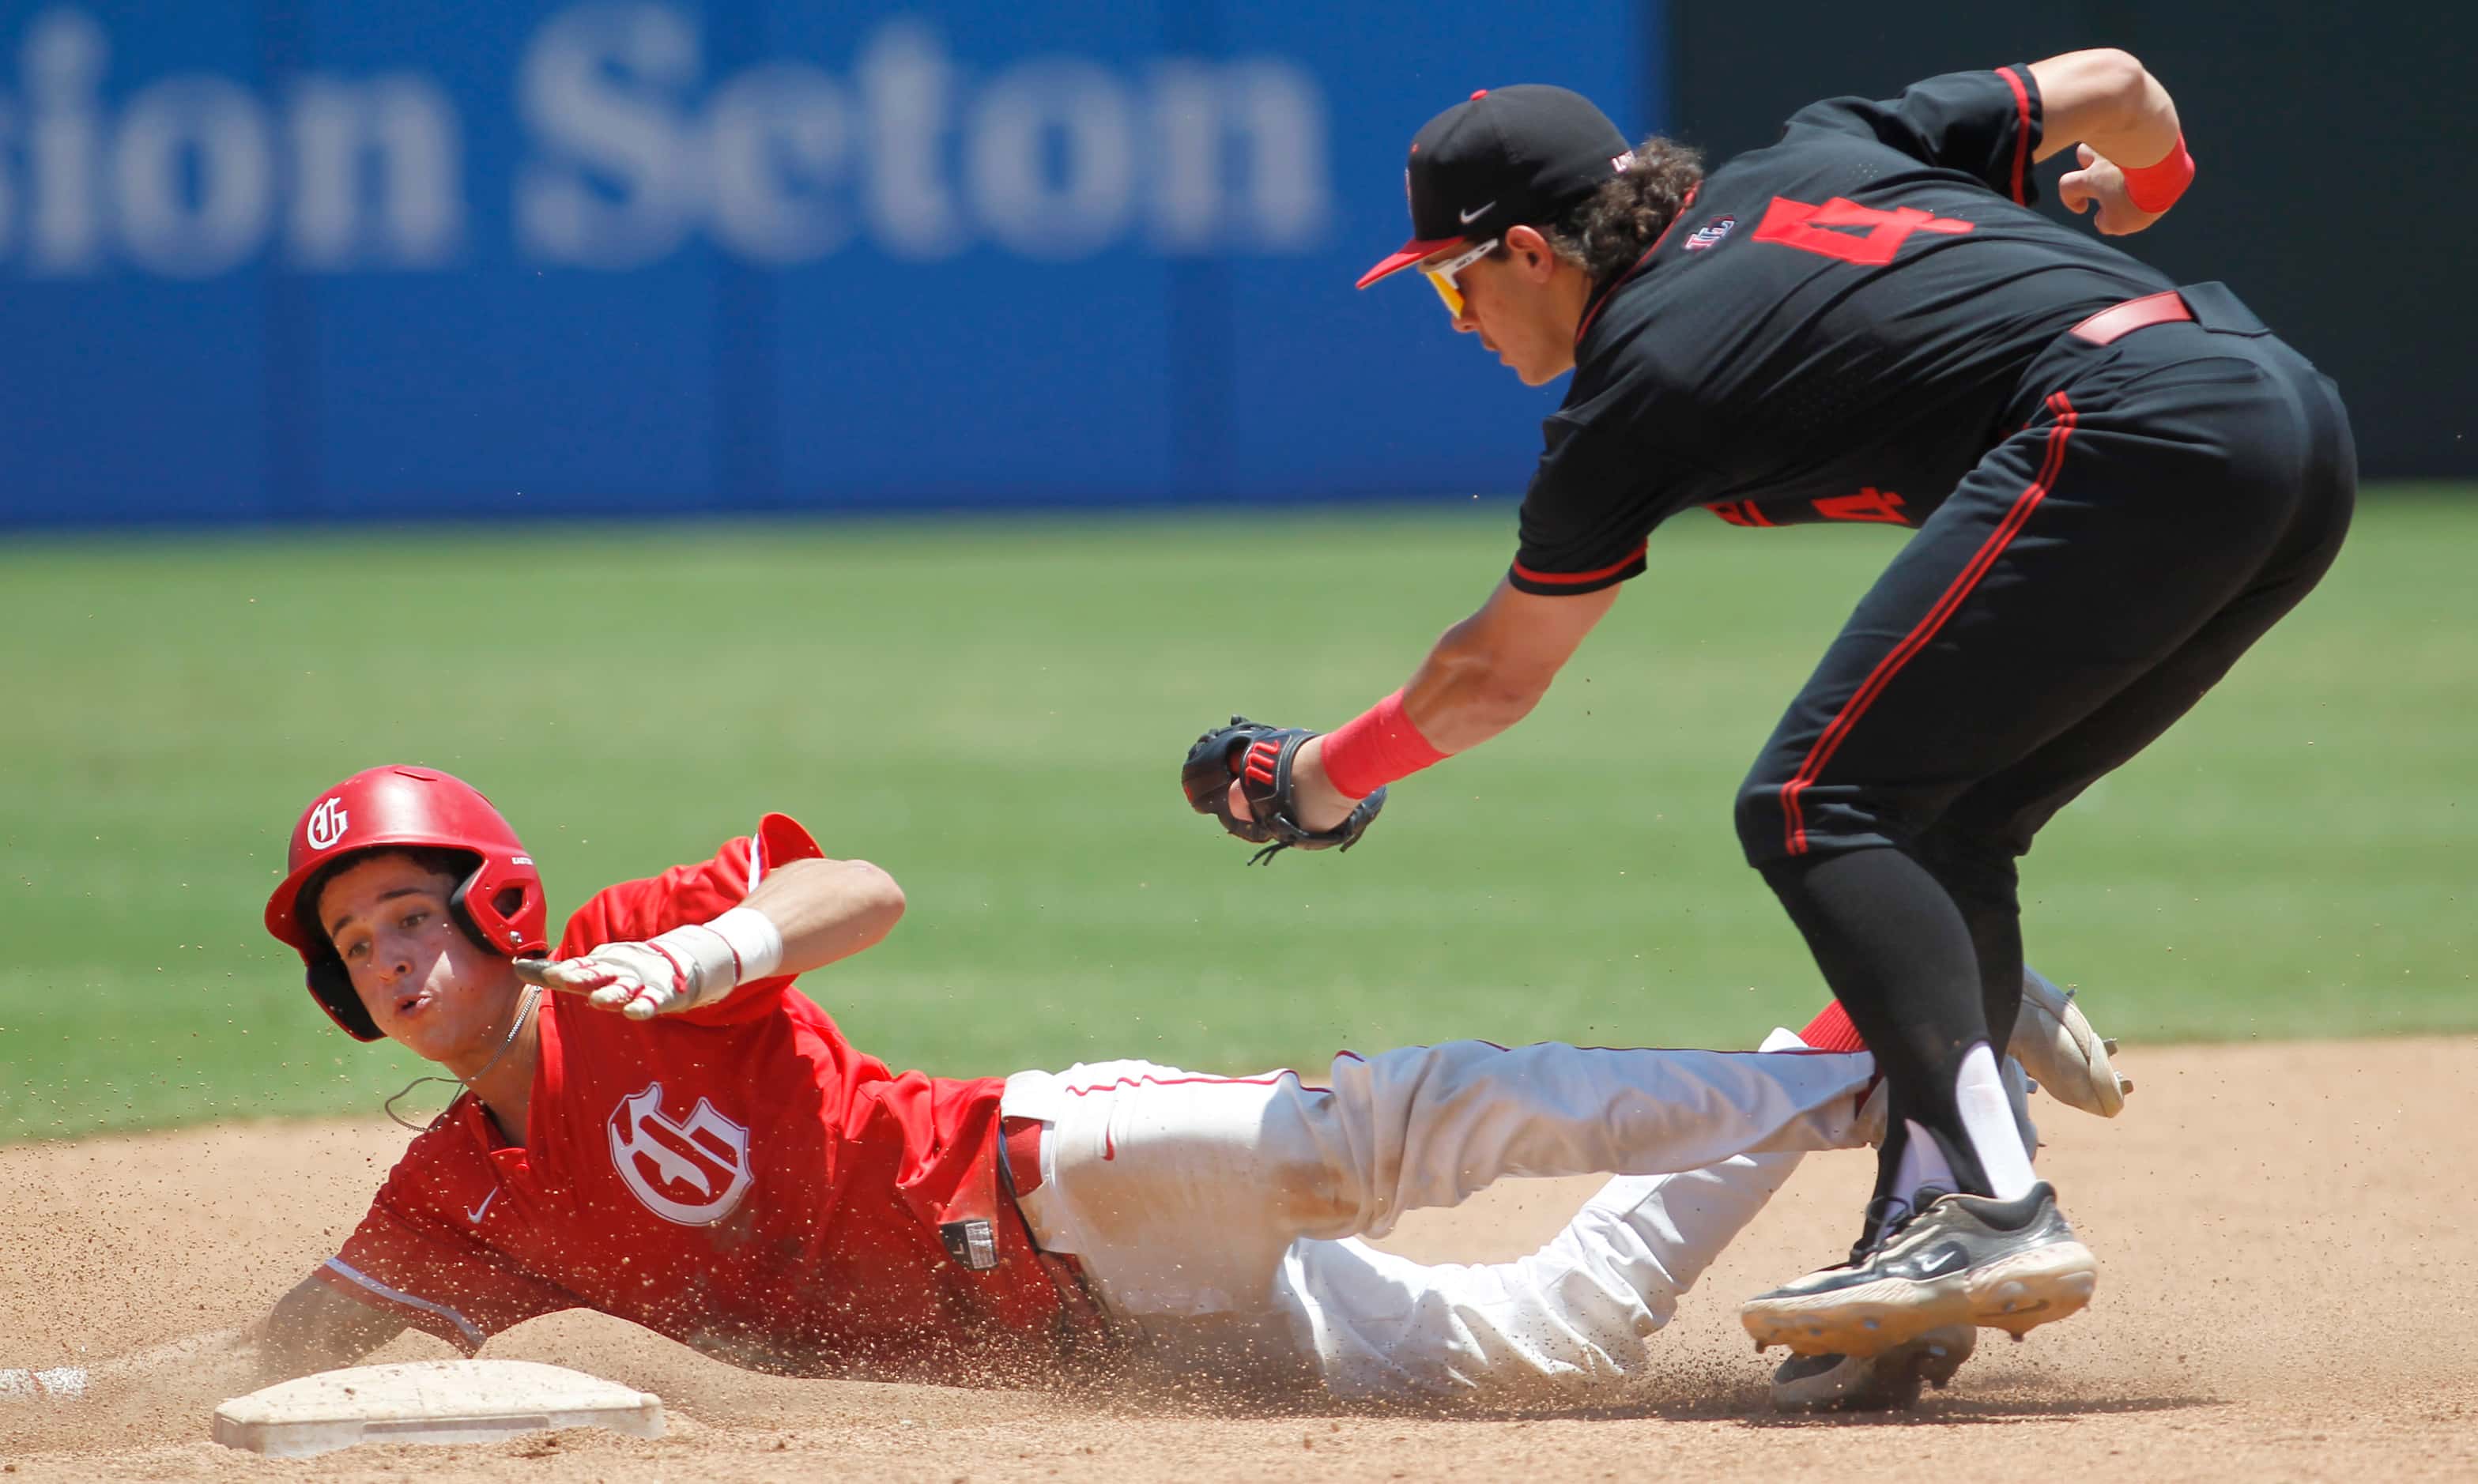 Grapevine baserunner Brenton Lee (4) is tagged out by Lovejoy shortstop Kyle Branch (4)...